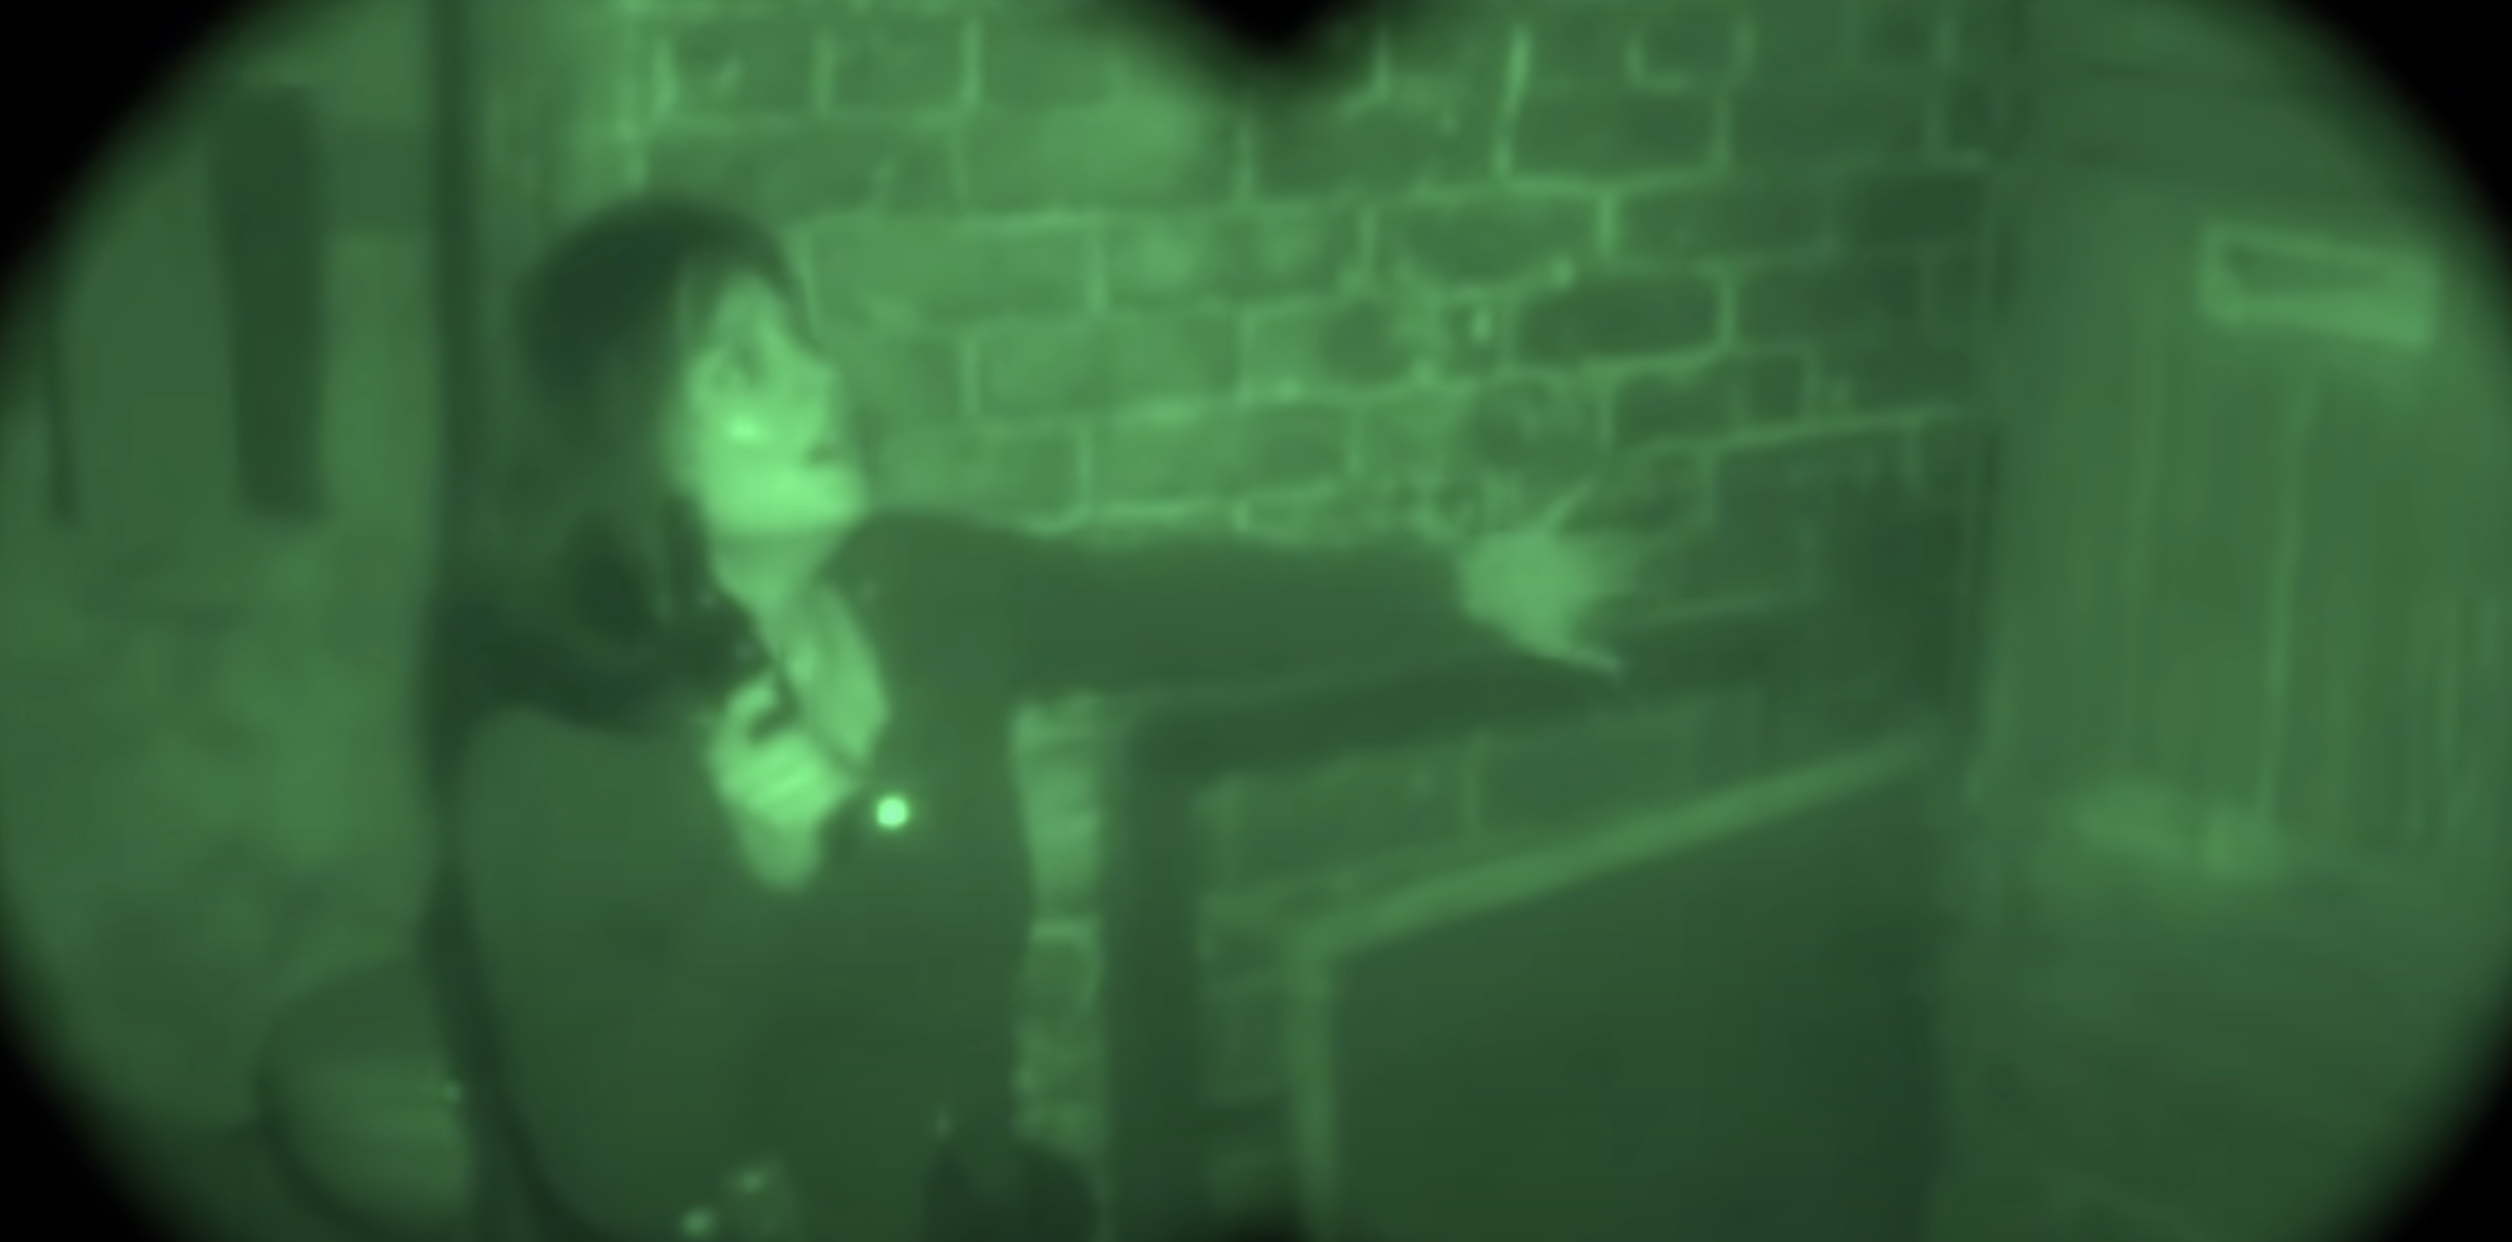 A scared woman seen through night vision goggles grabs hold of the wall